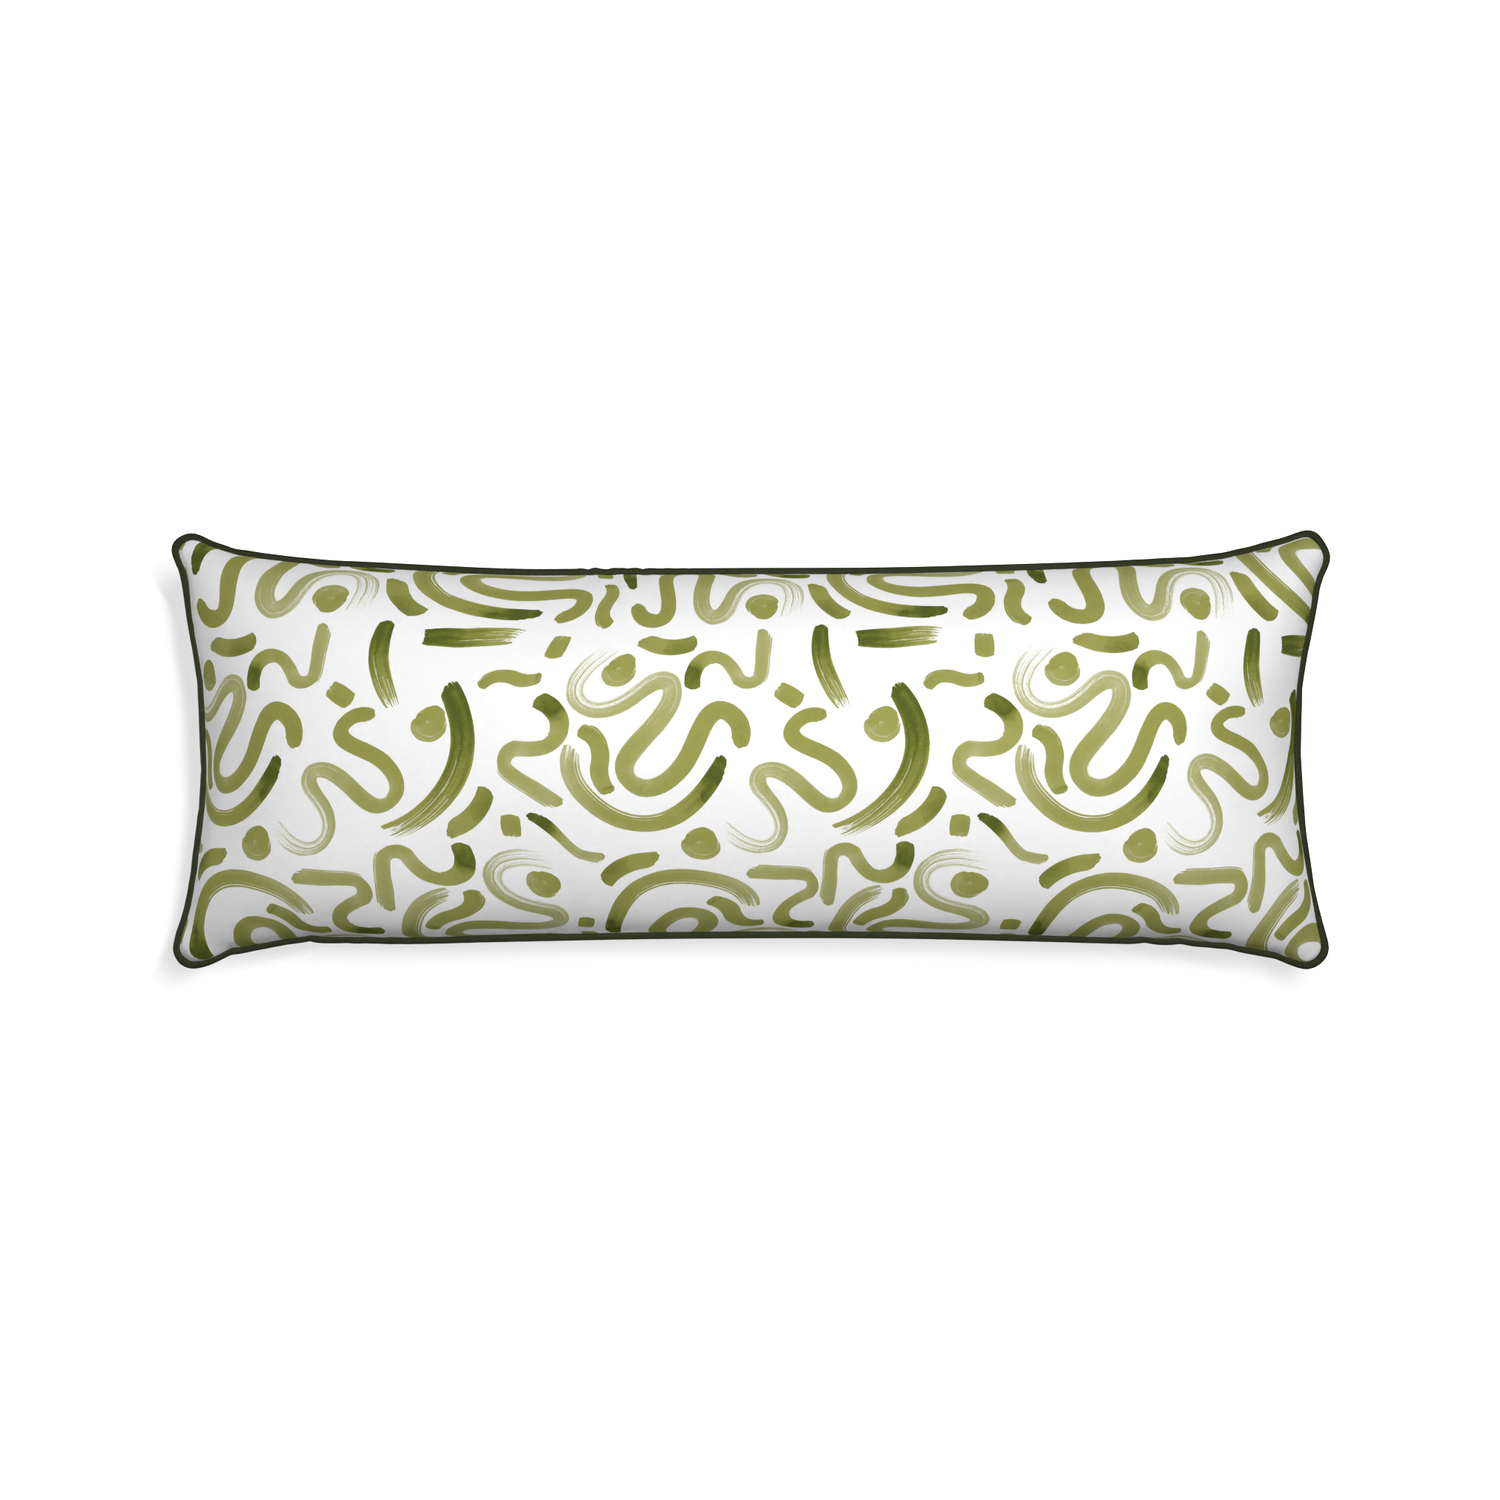 Xl-lumbar hockney moss custom moss greenpillow with f piping on white background